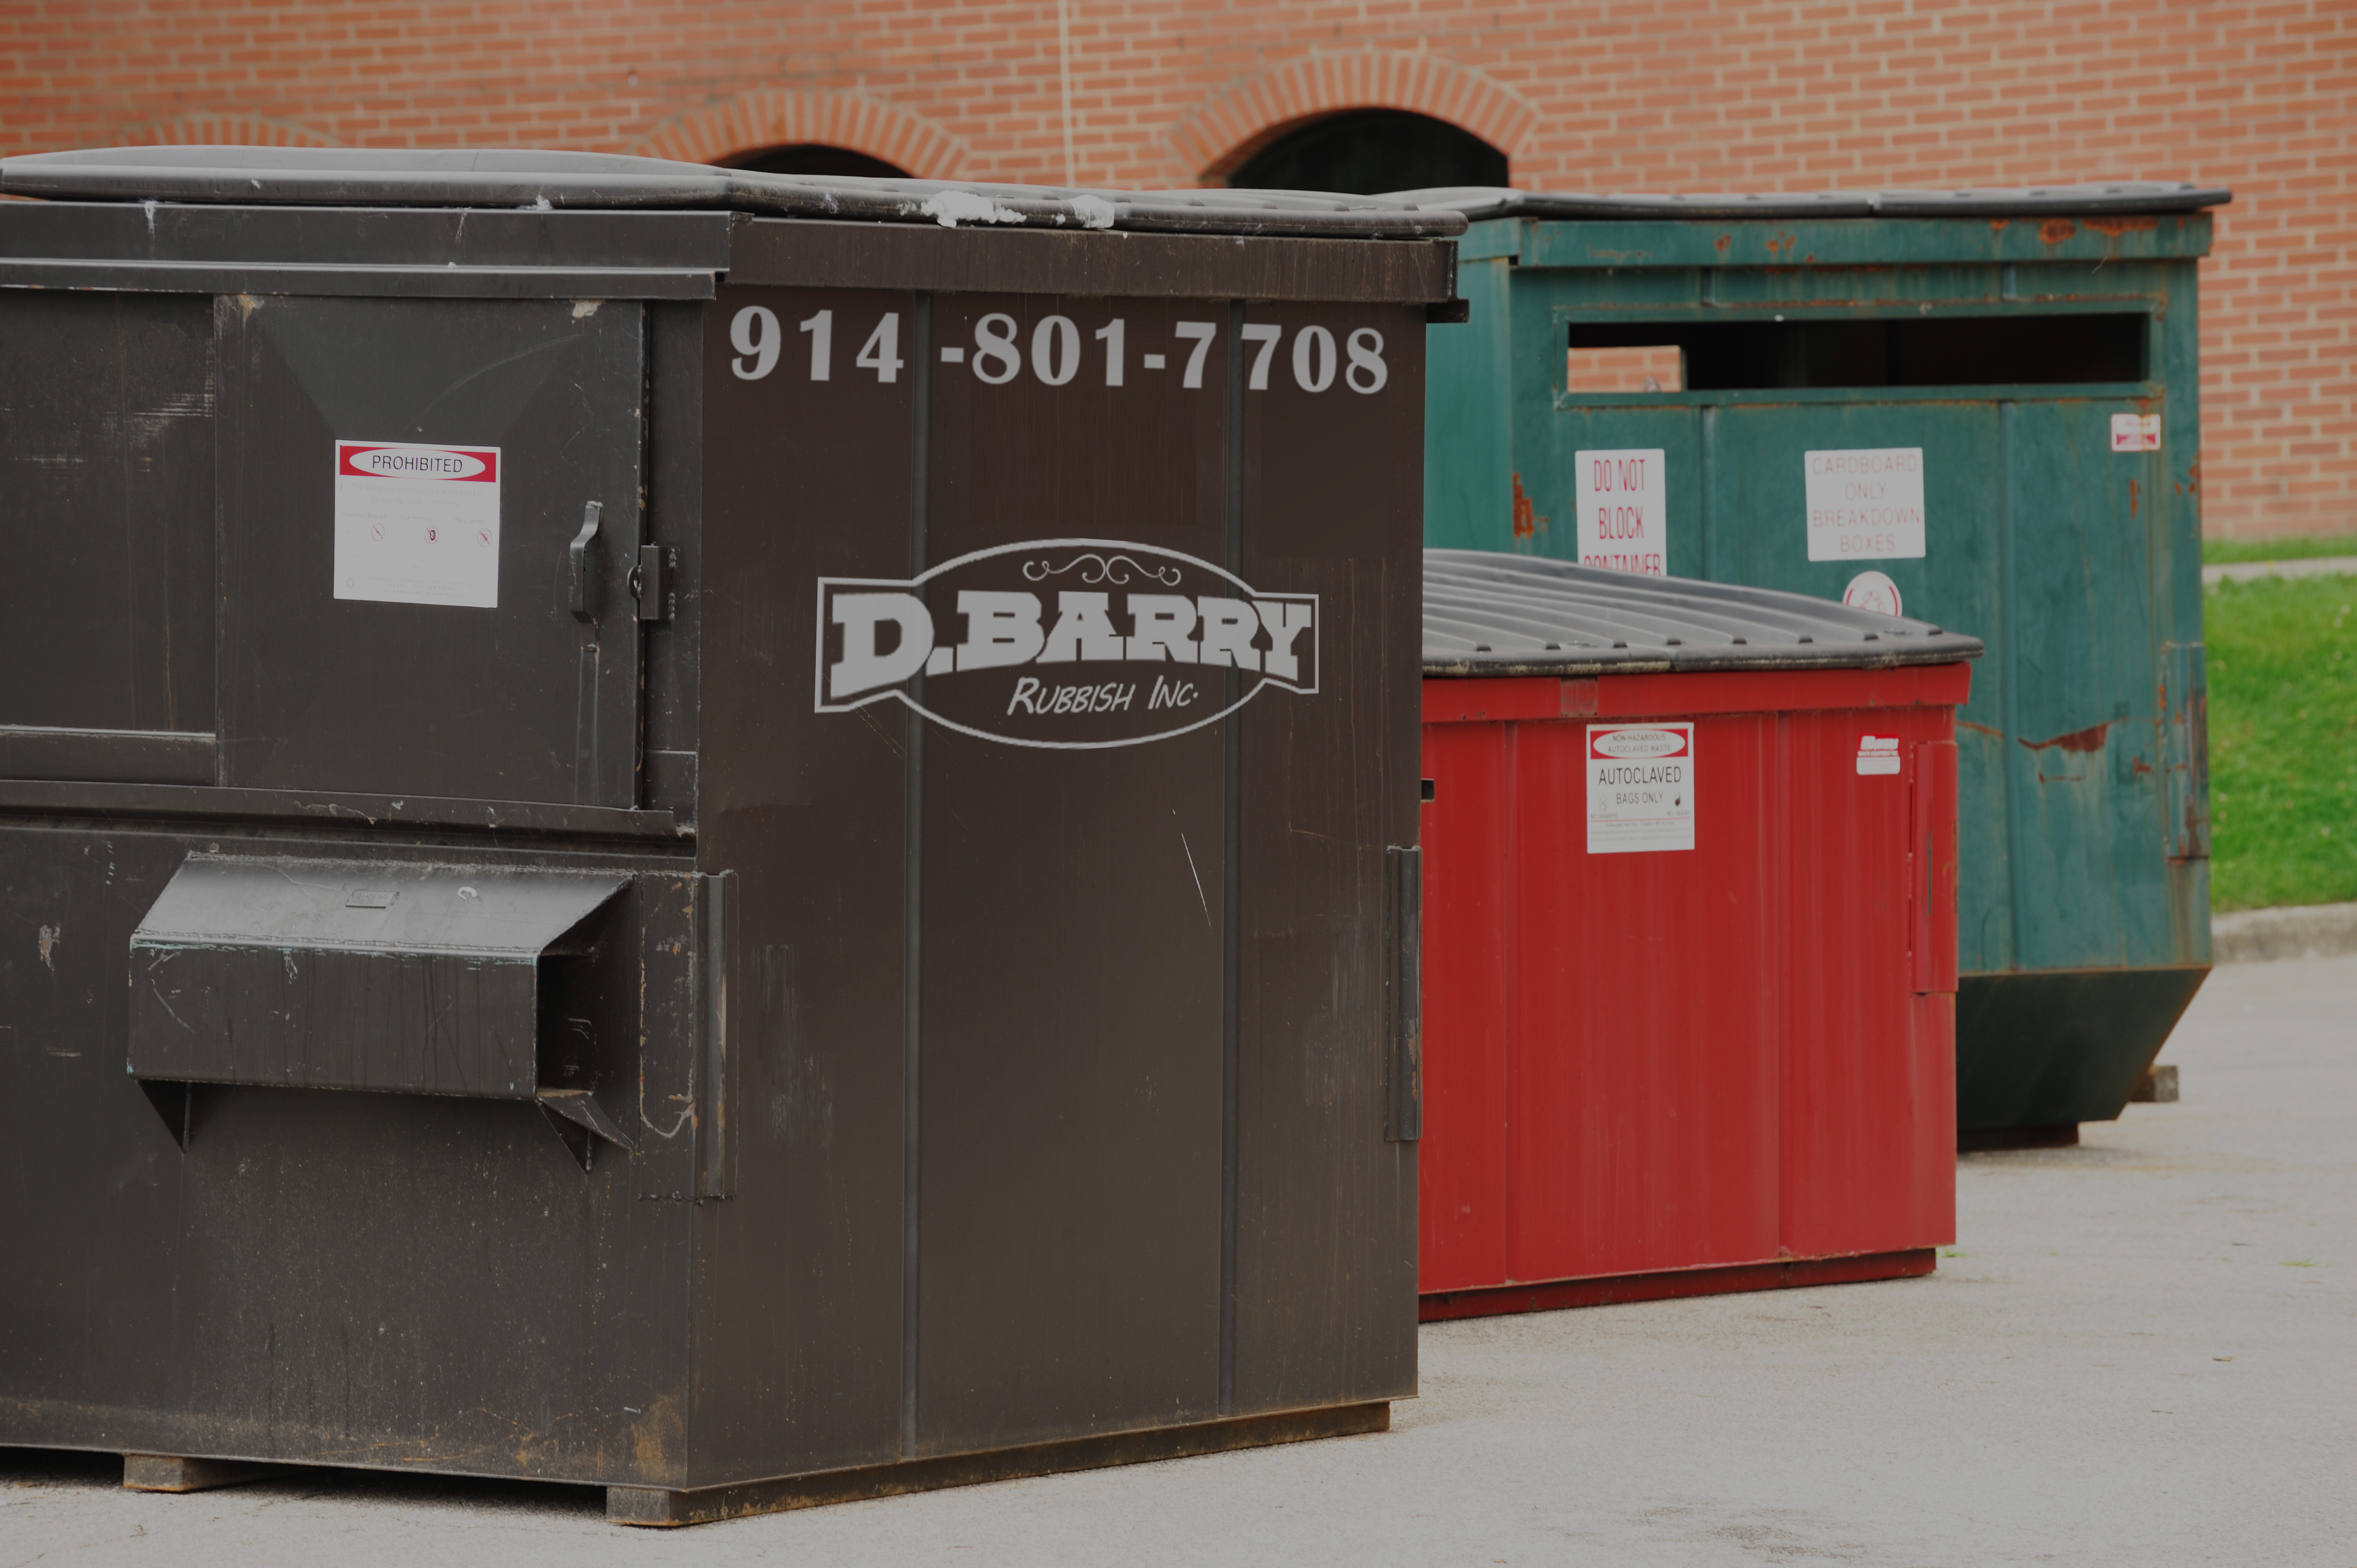 Line-up of dumpsters. The dumpster in the foreground has the D. Barry Rubbish Inc. logo on it.